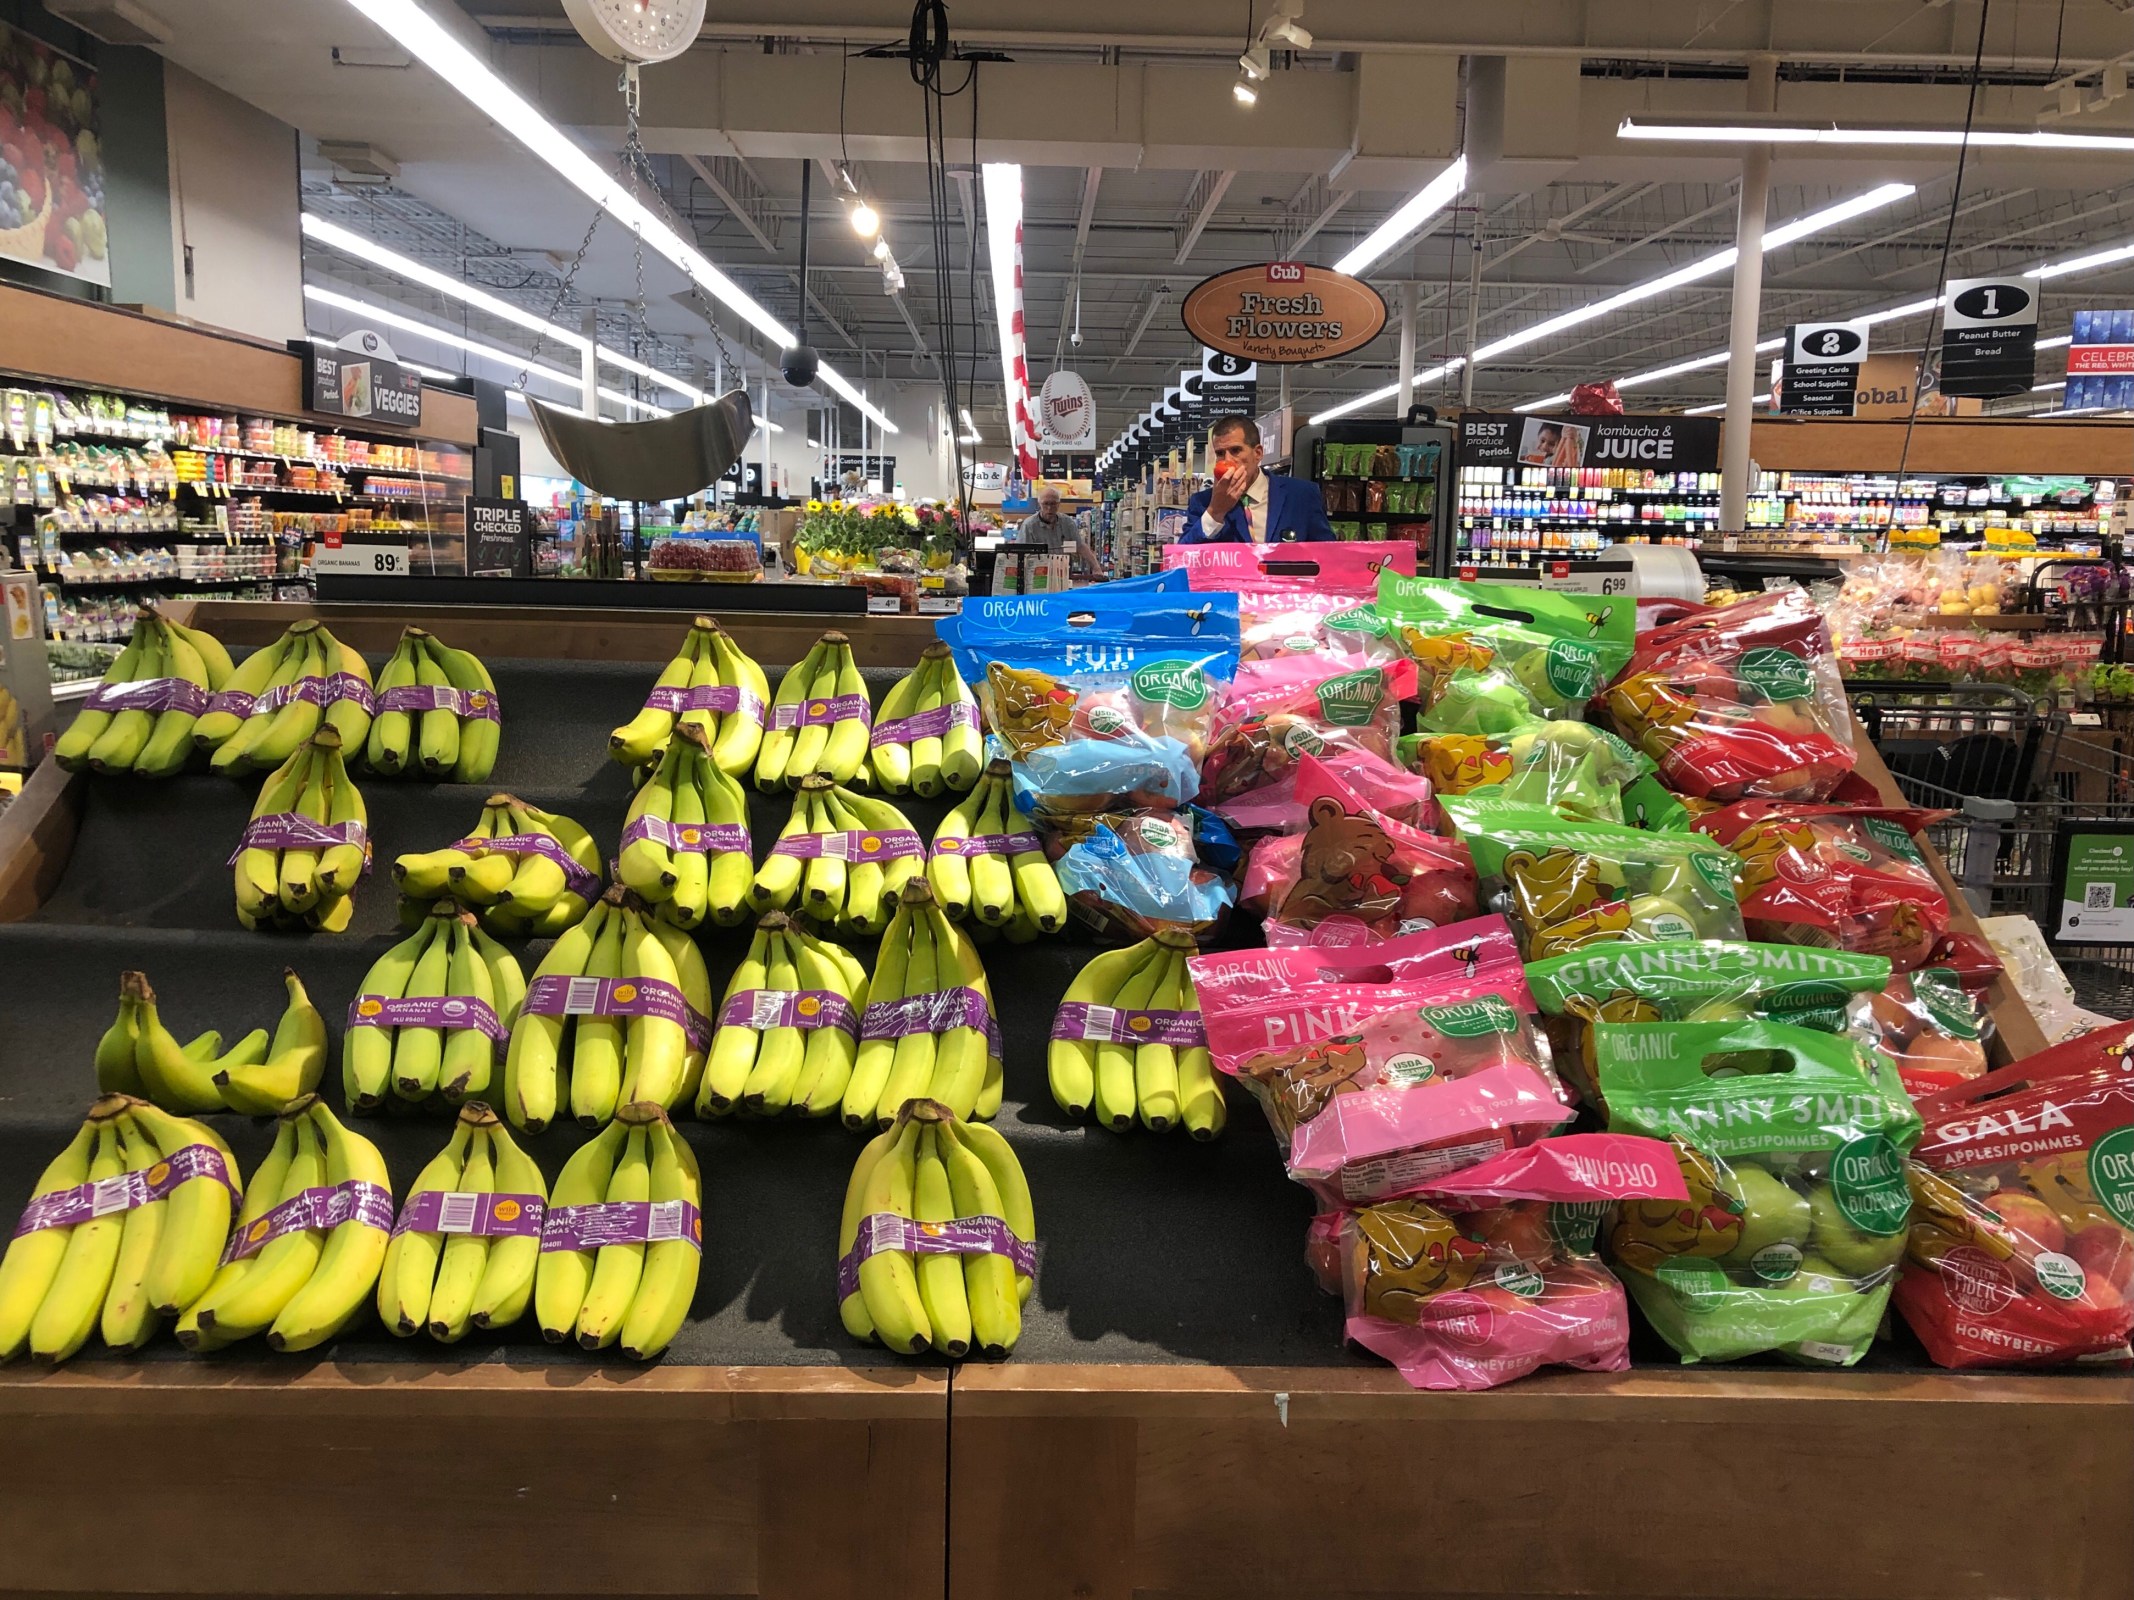 a display of organic bananas and apples inside the uptown cub